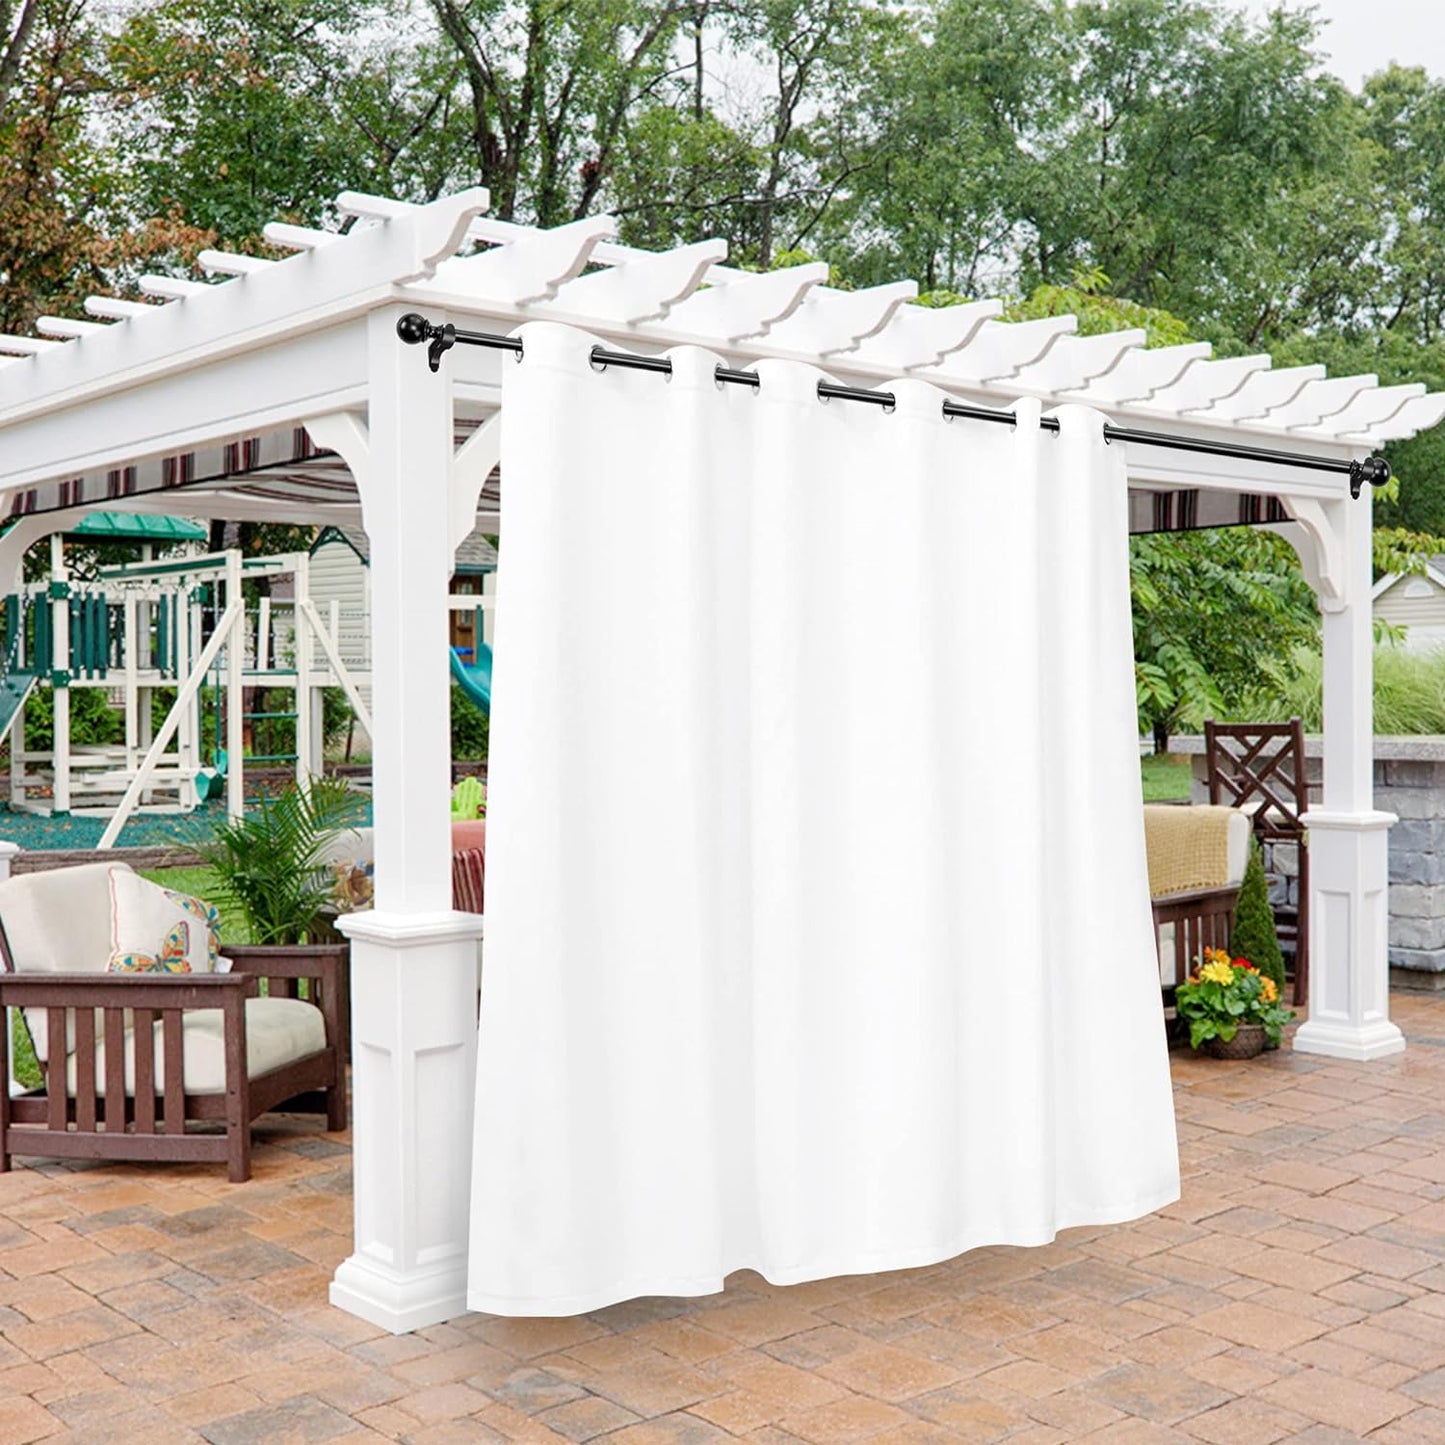 BONZER Outdoor Curtains for Patio Waterproof - Light Blocking Weather Resistant Privacy Grommet Blackout Curtains for Gazebo, Porch, Pergola, Cabana, Deck, Sunroom, 1 Panel, 52W X 84L Inch, Silver  BONZER White 100W X 84 Inch 